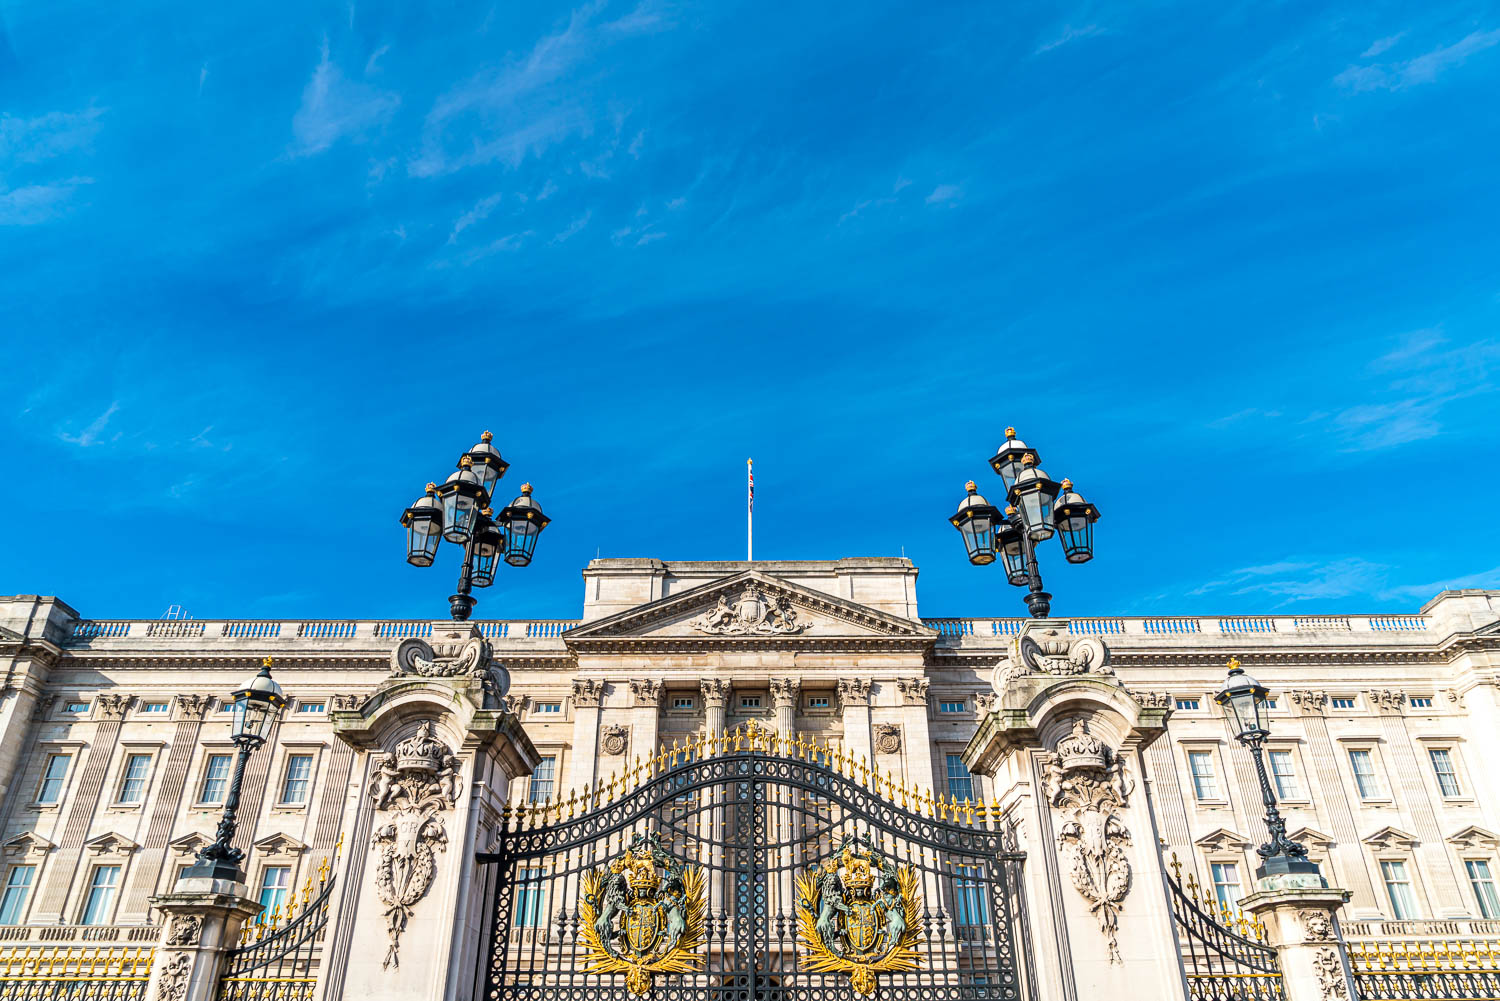 Gilded gates and front view of Buckingham Palace - the start and end point of the two processions during the coronation in London